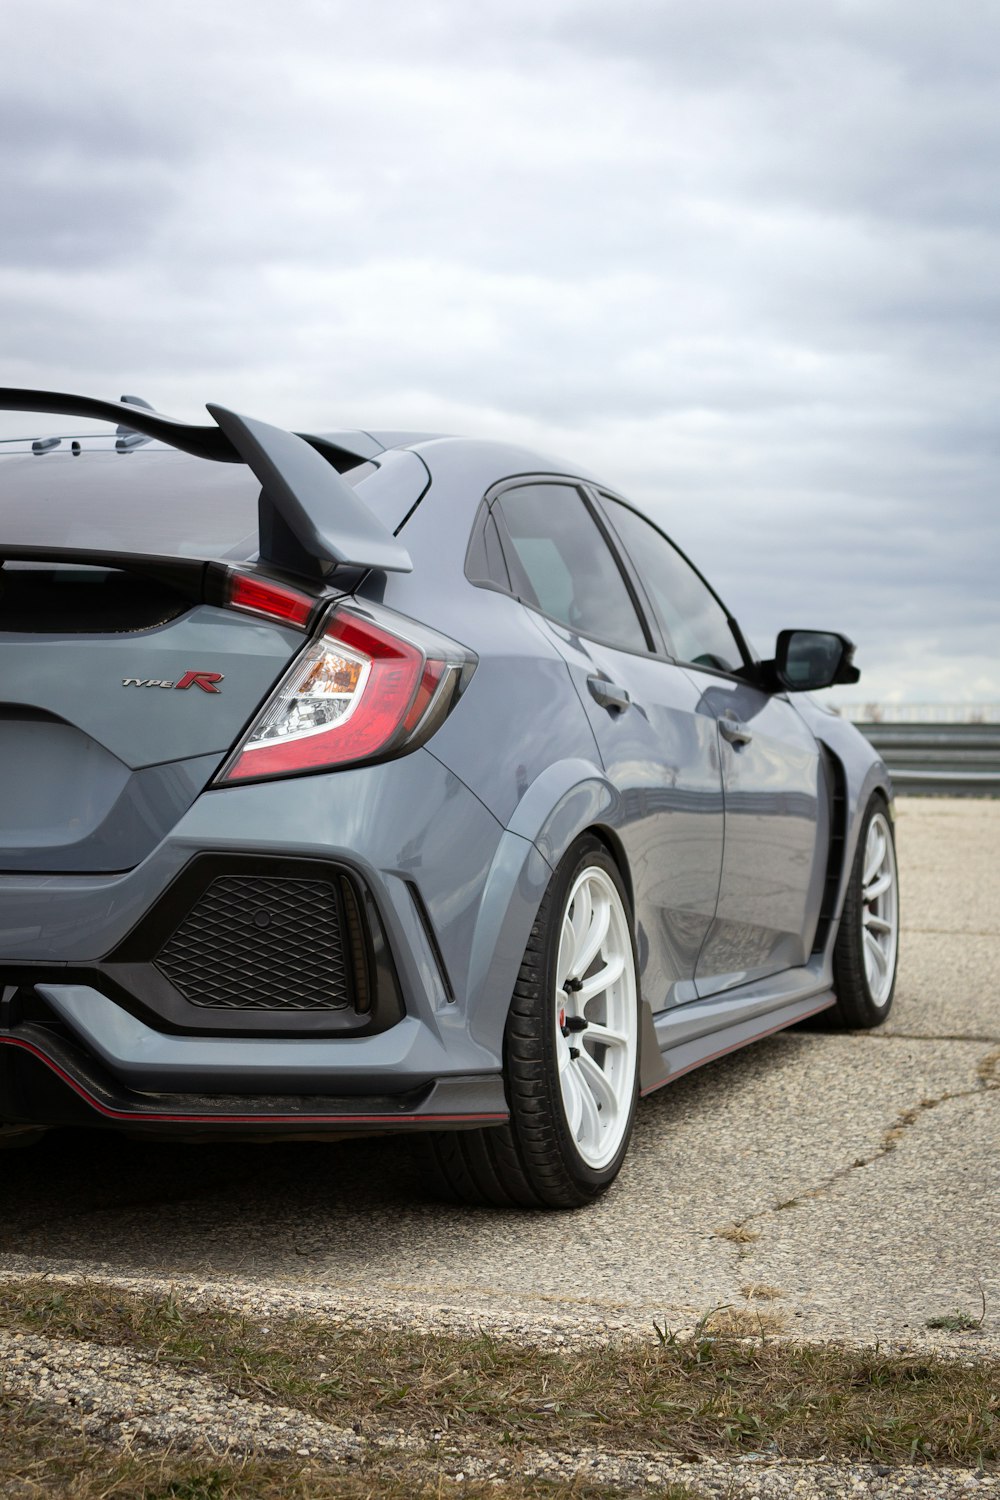 Honda Civic Type R Pictures | Download Free Images on Unsplash